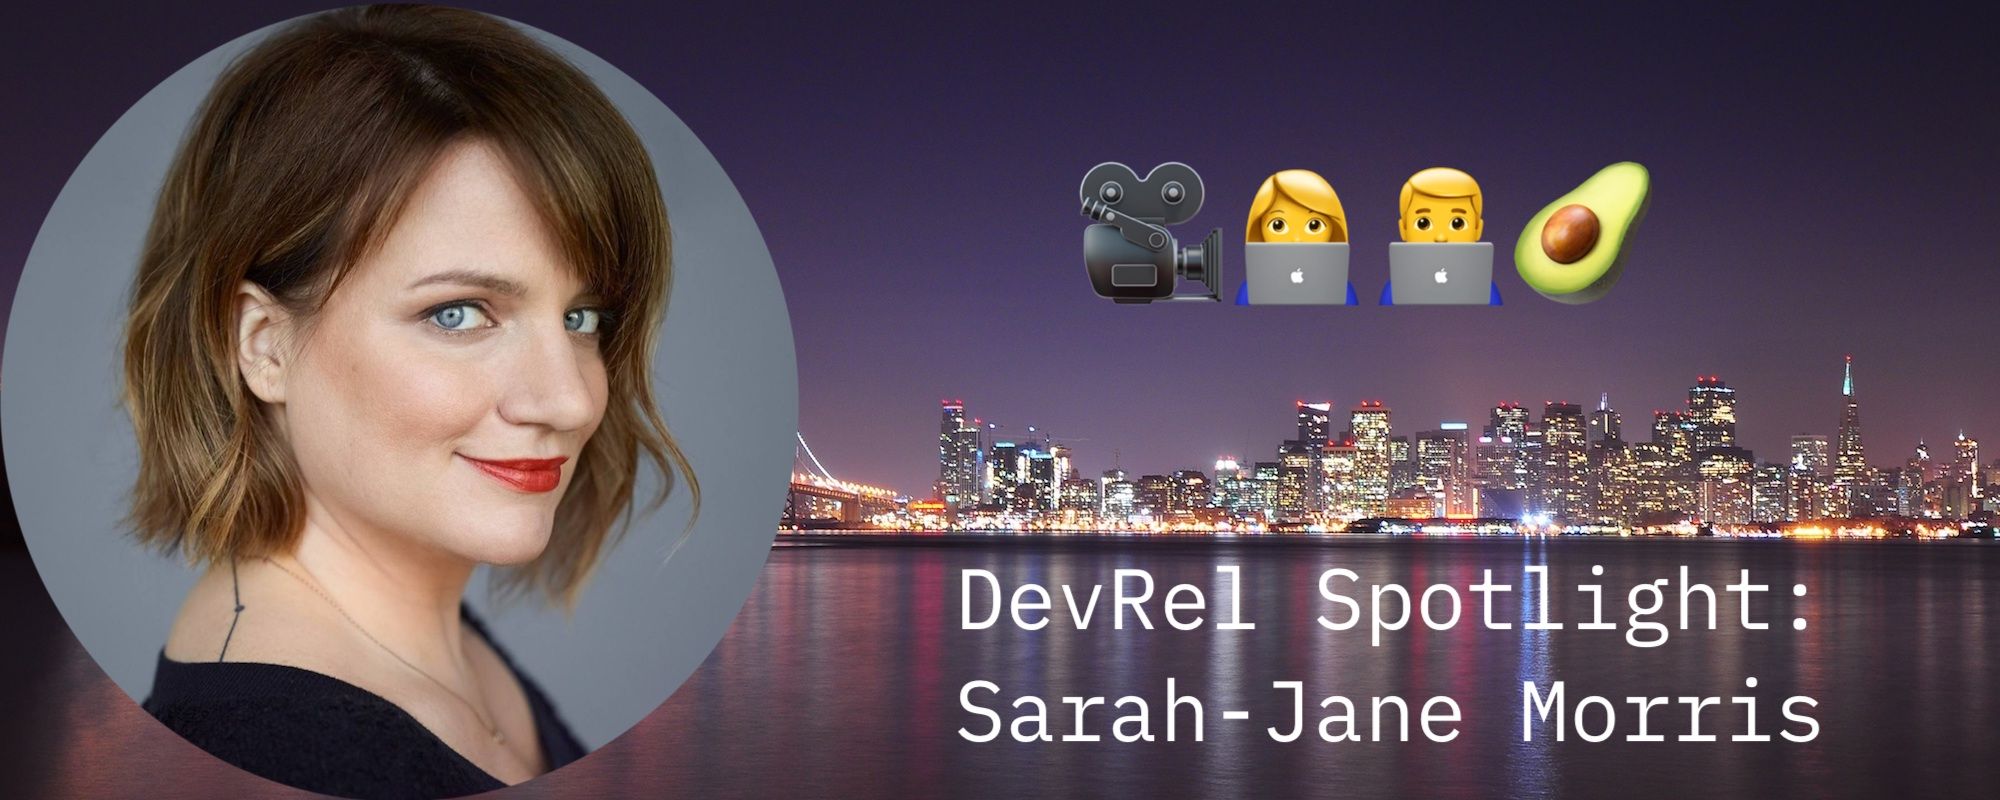 DevRel Engineer One: Building a Developer Relations Team from The Ground Up